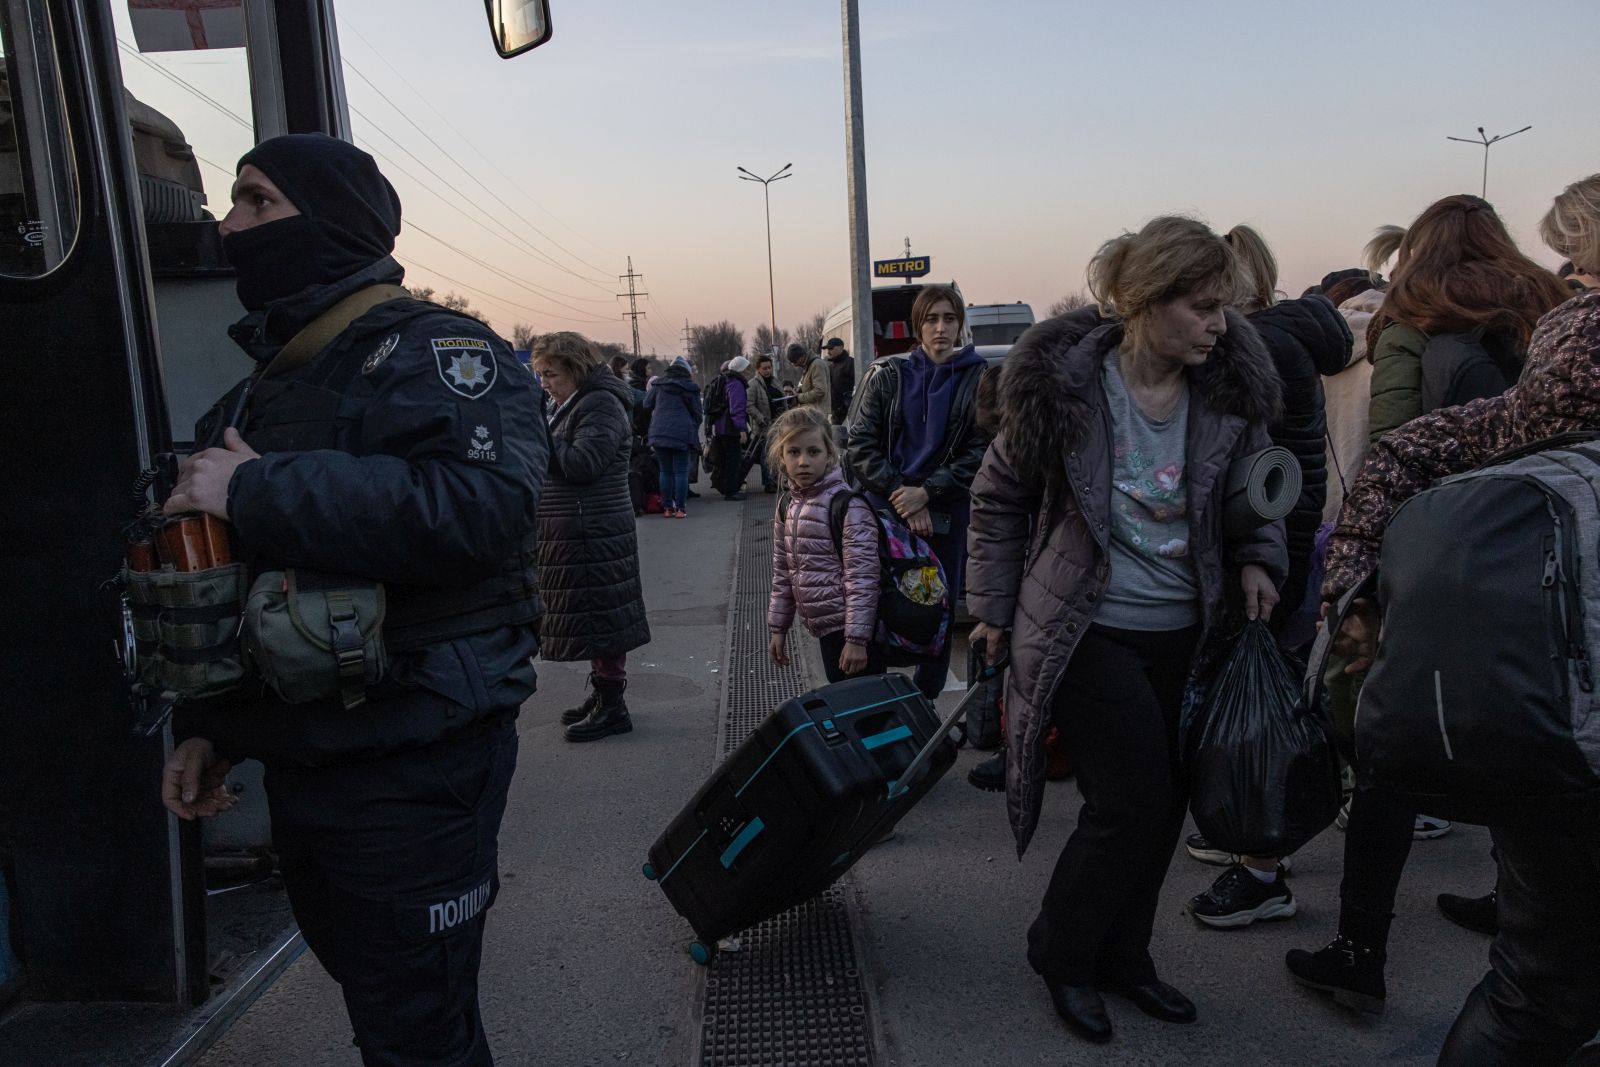 epa09850008 People who fled from the besieged by Russian military southeastern city of Mariupol and occupied Melitopol gather after arriving at the evacuation point in Zaporizhzhia, Ukraine, 25 March 2022. Hundreds of people were evacuated on 25 March from the southeastern cities of Mariupol and Melitopol and arrived in Ukraine's controlled area by buses and their own cars. Almost 100,000 residents remain trapped and live in 'inhuman conditions' without food and water in the ruined city of Mariupol, amid Russia's 'constant shelling', Ukrainian president Volodymyr Zelenskyy says.  EPA/ROMAN PILIPEY